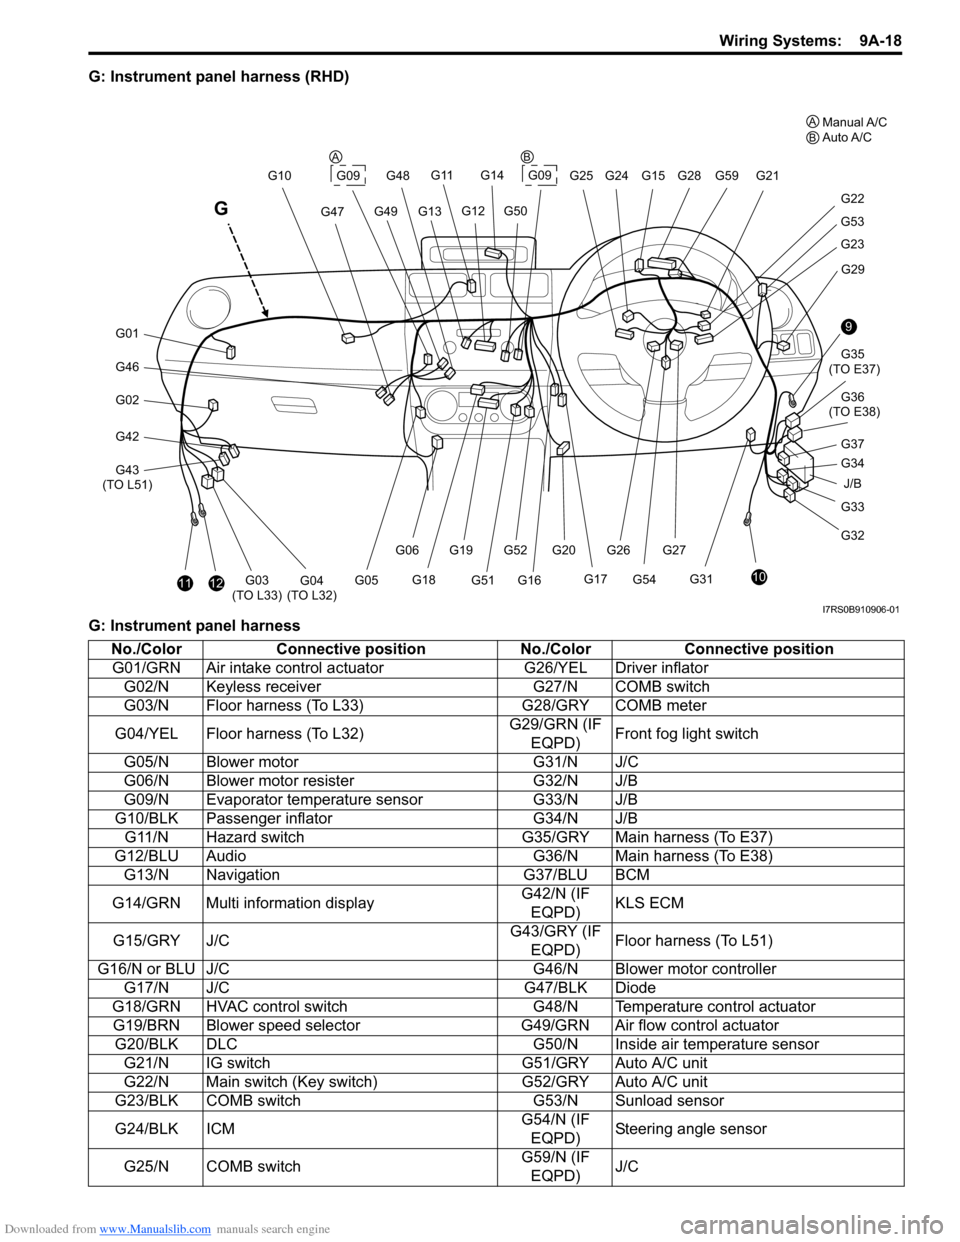 SUZUKI SWIFT 2004 2.G Service Workshop Manual Downloaded from www.Manualslib.com manuals search engine Wiring Systems:  9A-18
G: Instrument panel harness (RHD)
G: Instrument panel harness
J/B
9
10
G33
G32 G34 G35
 (TO E37)
G36
 (TO E38)
G31 G29
G